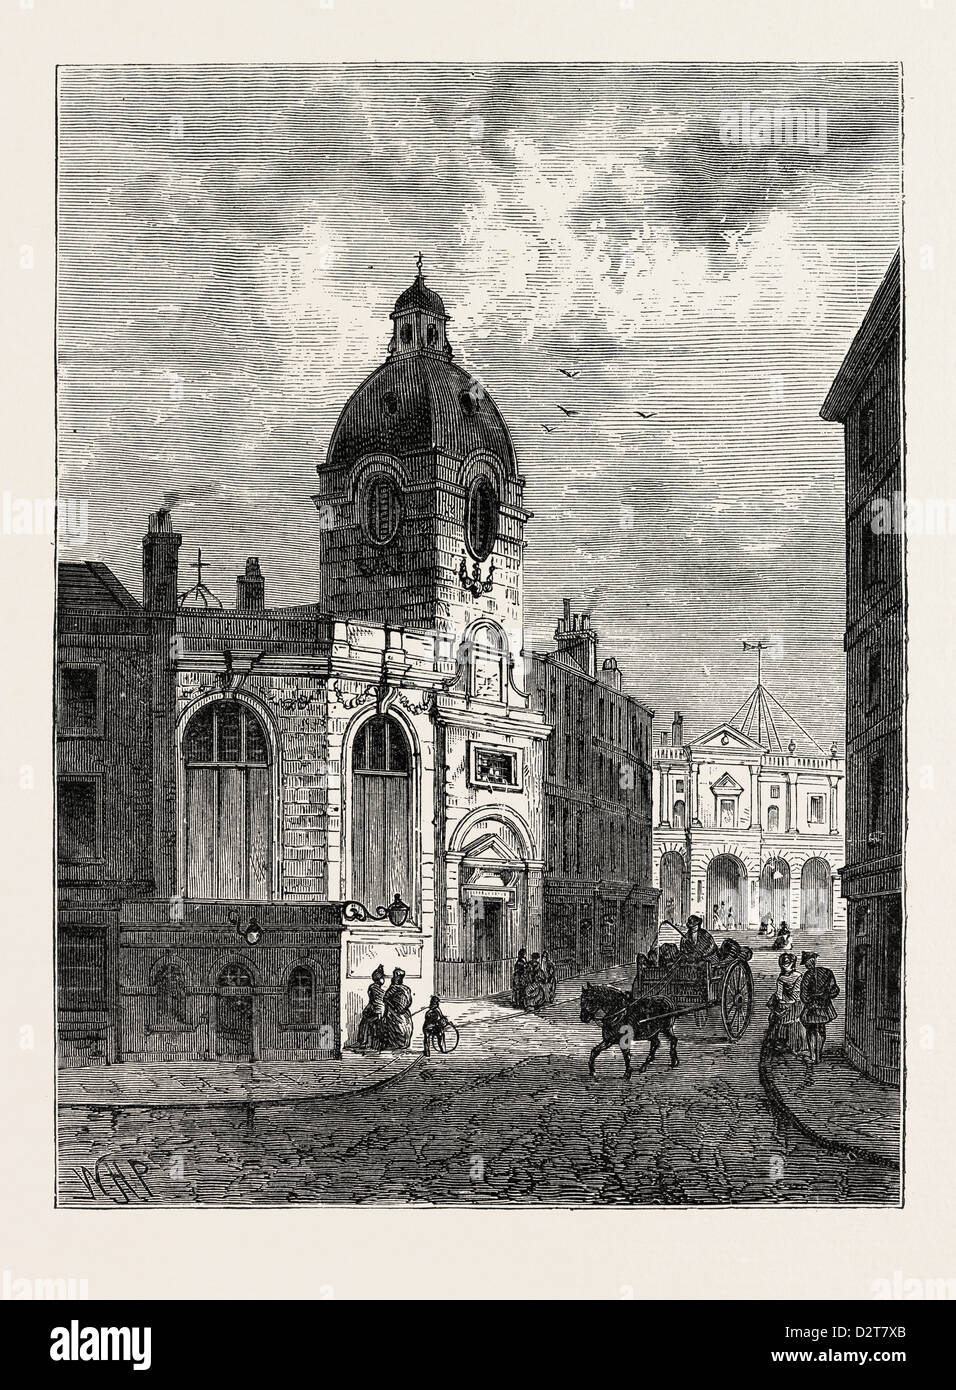 THE CHURCH OF ST. BENET FINK FROM AN OLD VIEW LONDON Stock Photo